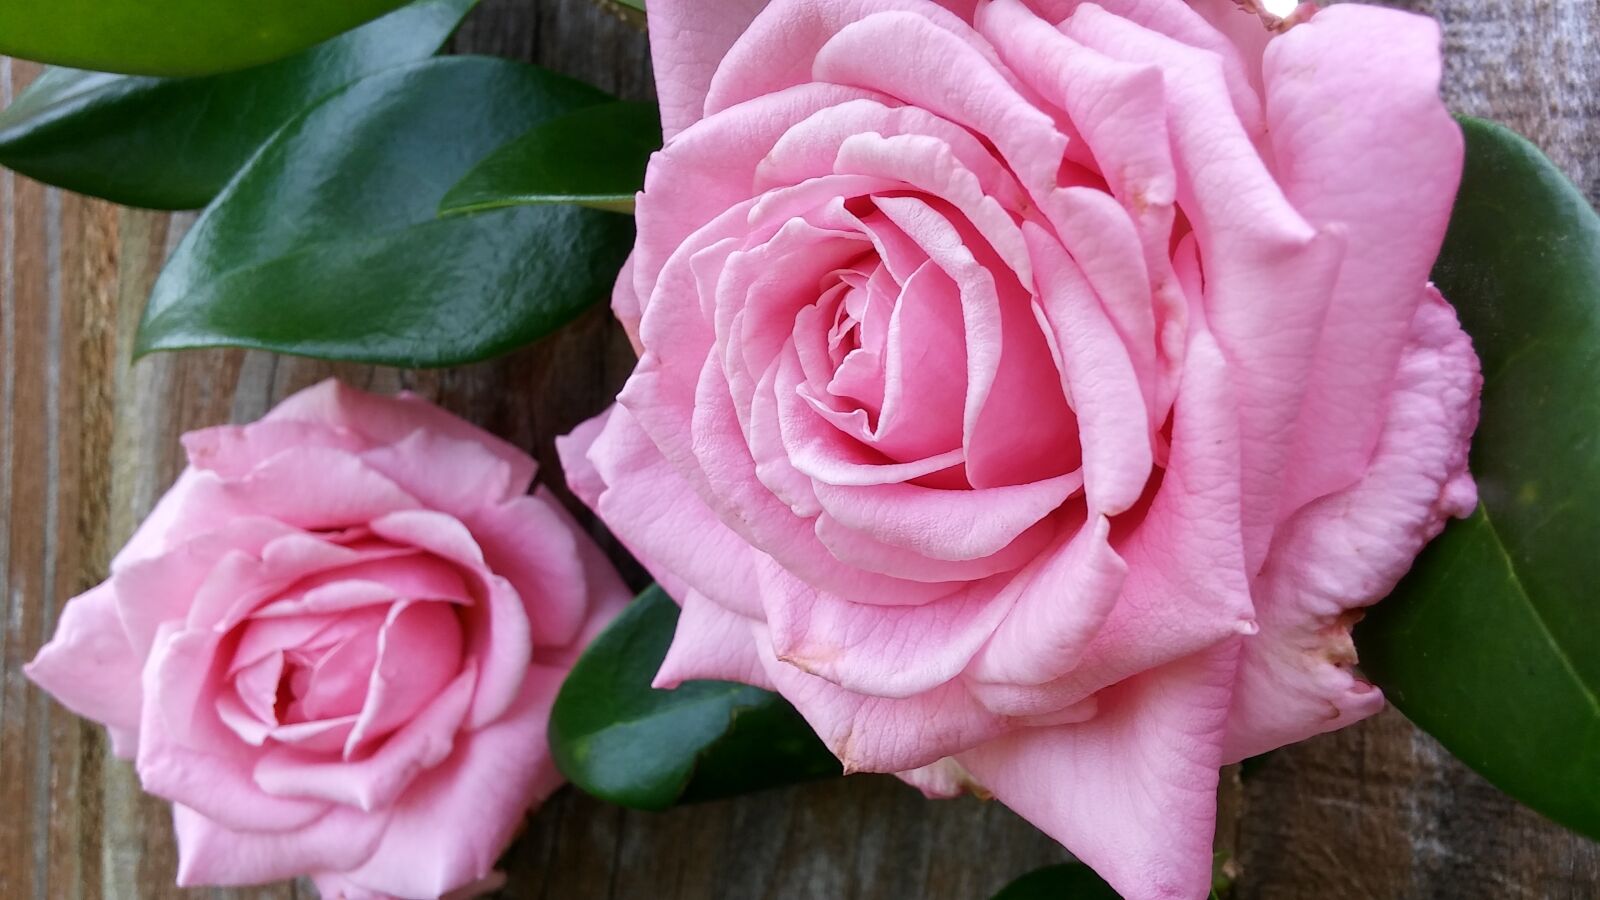 LG G STYLO sample photo. Two roses, green leaves photography